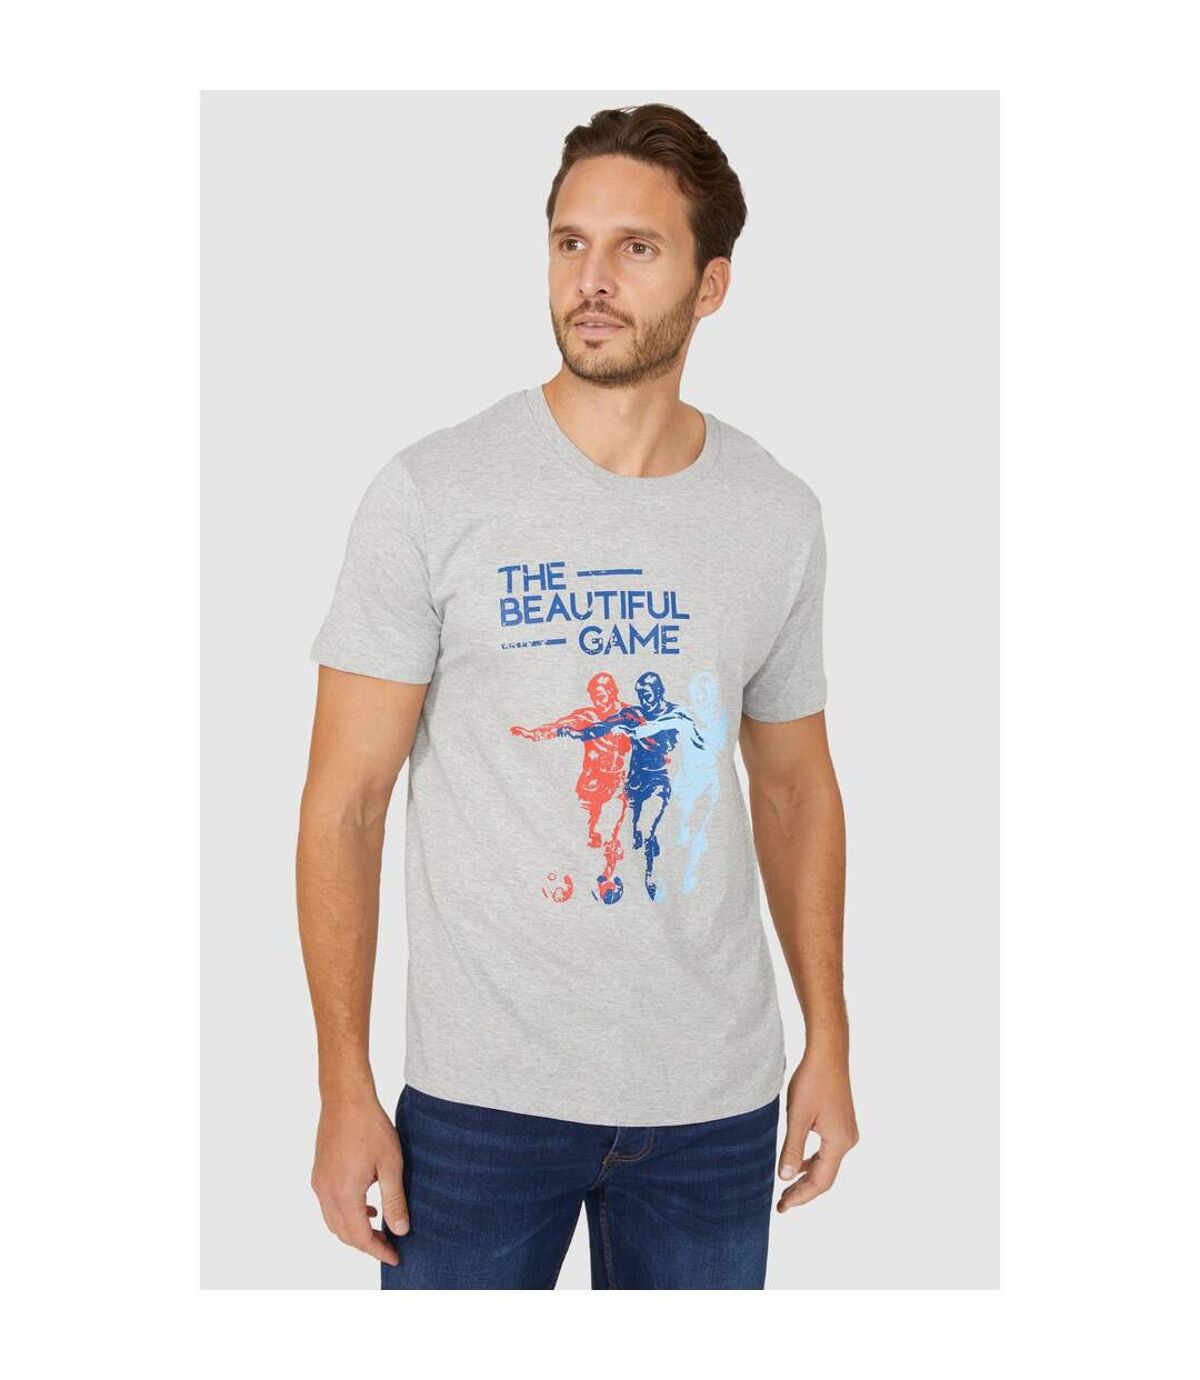 Maine - T-shirt THE BEAUTIFUL GAME - Homme (Gris chiné) - UTDH3744